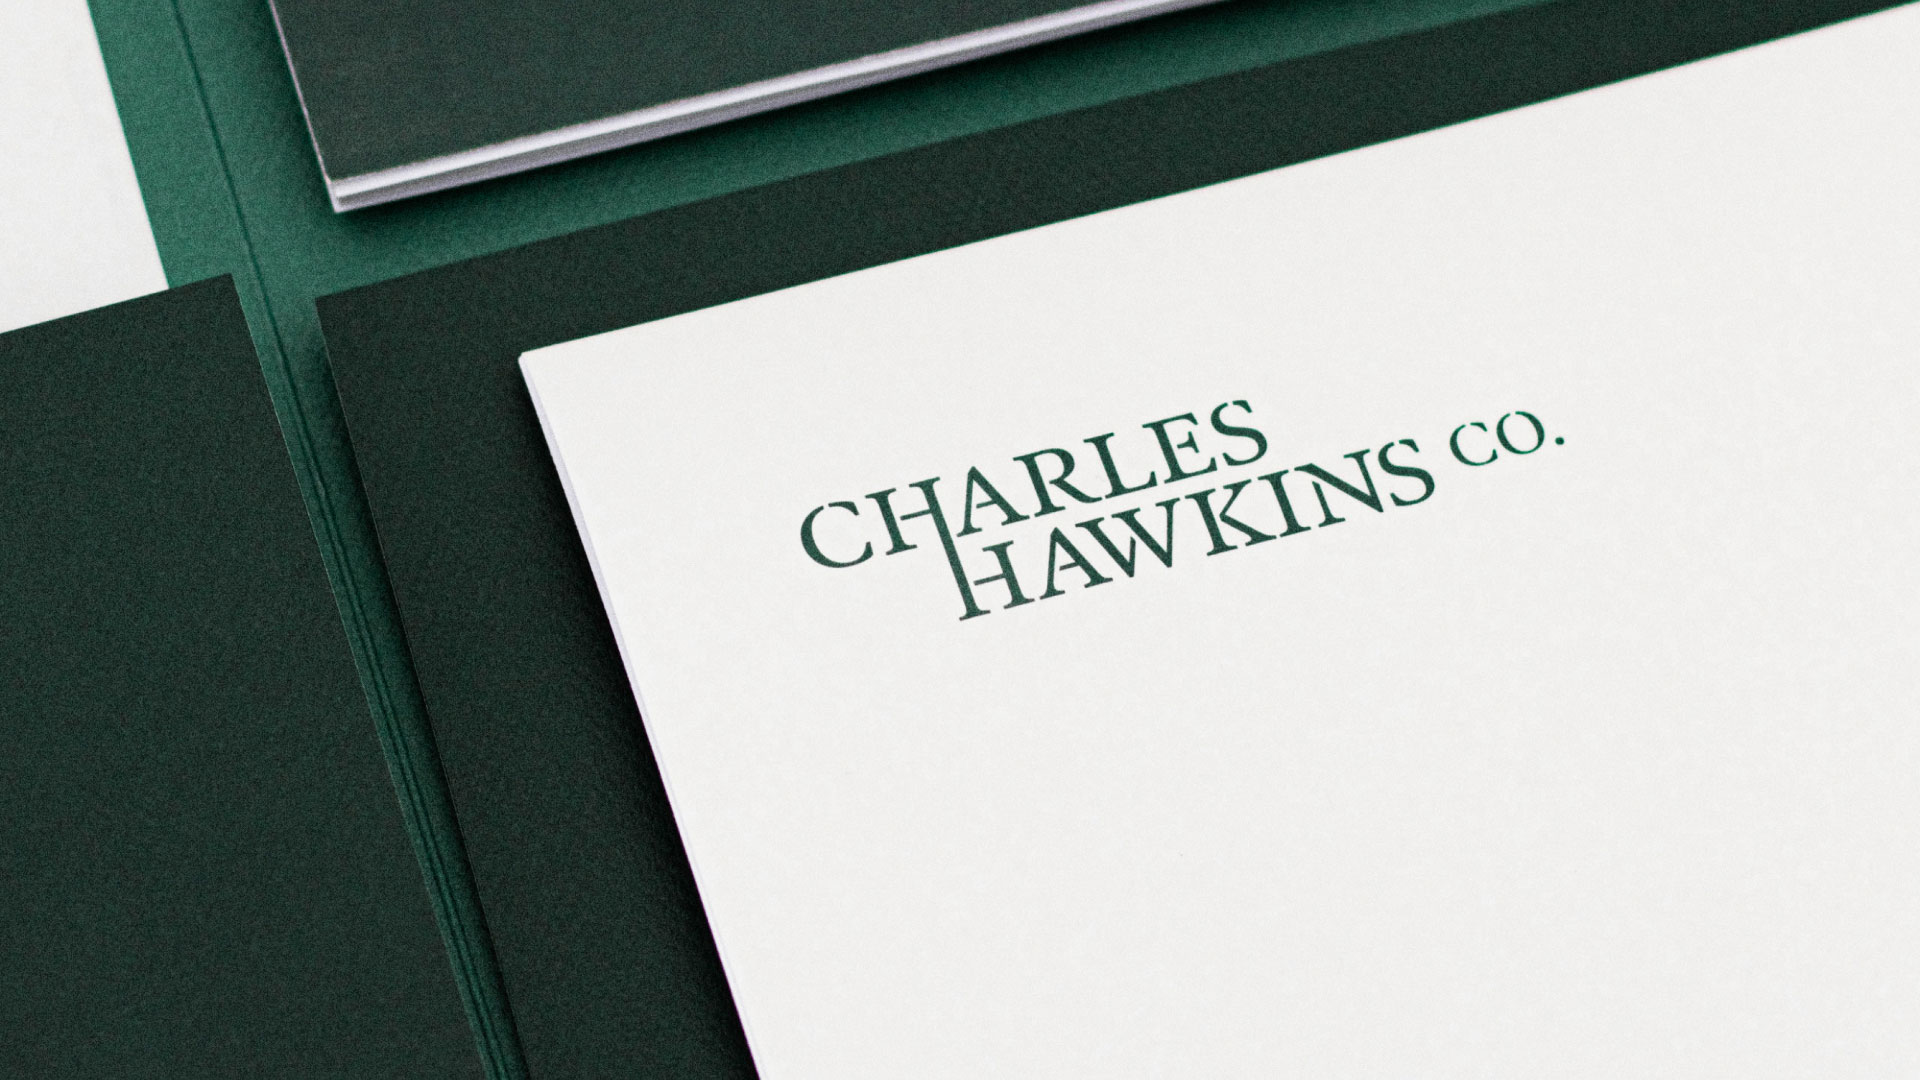 Charles Hawkins Co. logo on stationery paper